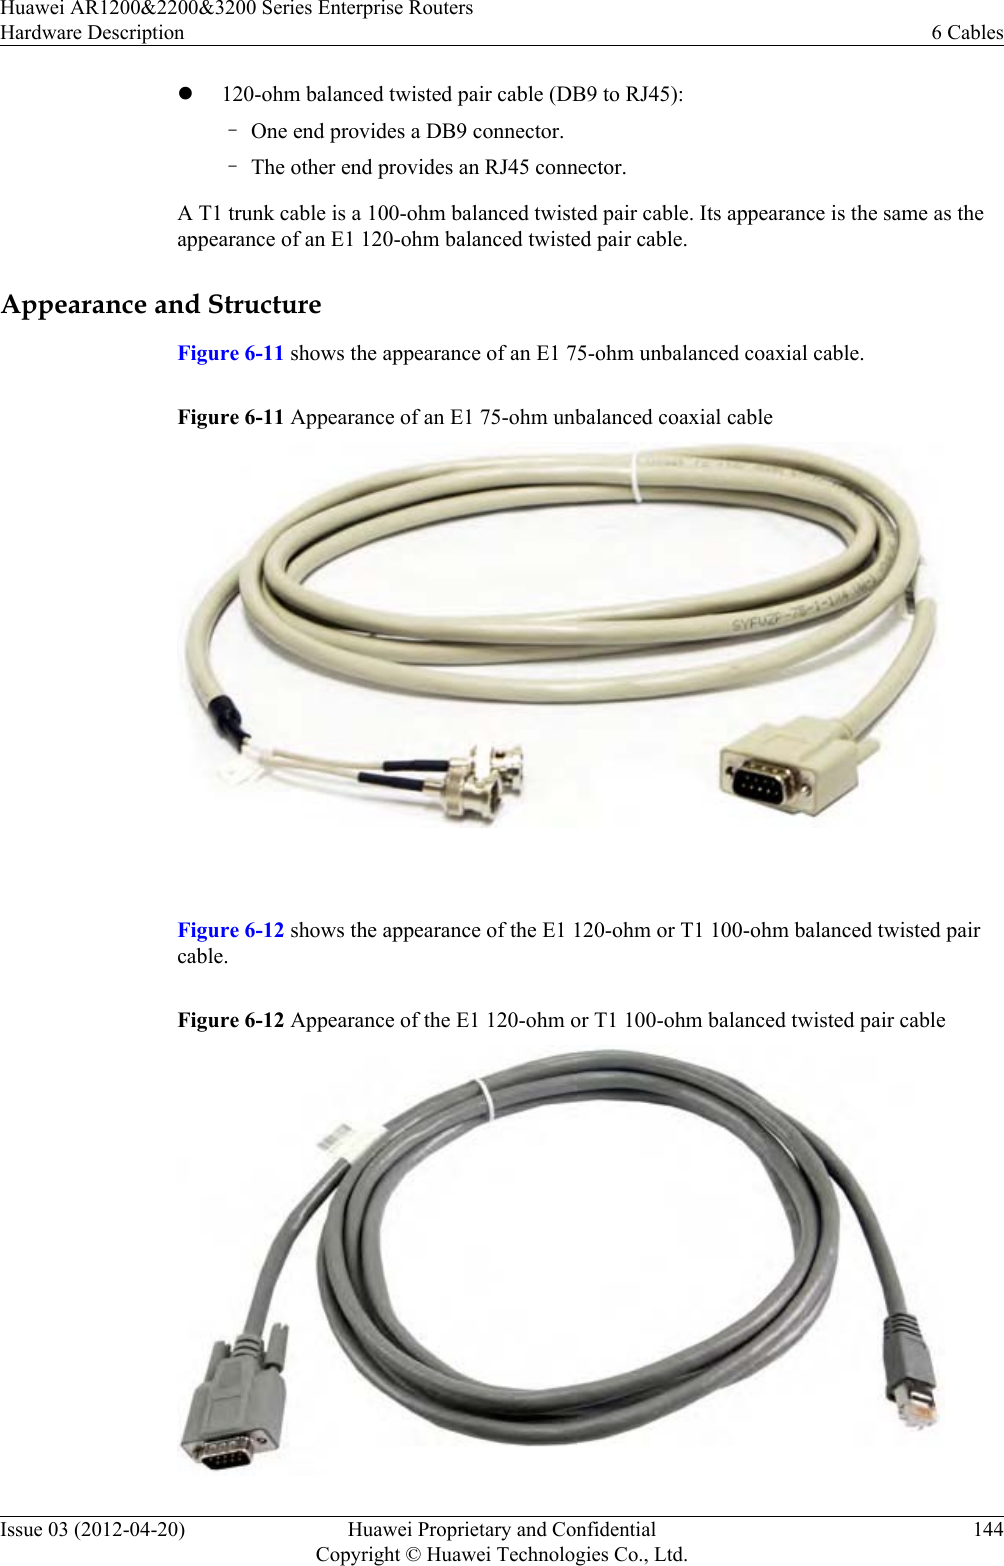 l120-ohm balanced twisted pair cable (DB9 to RJ45):–One end provides a DB9 connector.–The other end provides an RJ45 connector.A T1 trunk cable is a 100-ohm balanced twisted pair cable. Its appearance is the same as theappearance of an E1 120-ohm balanced twisted pair cable.Appearance and StructureFigure 6-11 shows the appearance of an E1 75-ohm unbalanced coaxial cable.Figure 6-11 Appearance of an E1 75-ohm unbalanced coaxial cable Figure 6-12 shows the appearance of the E1 120-ohm or T1 100-ohm balanced twisted paircable.Figure 6-12 Appearance of the E1 120-ohm or T1 100-ohm balanced twisted pair cableHuawei AR1200&amp;2200&amp;3200 Series Enterprise RoutersHardware Description 6 CablesIssue 03 (2012-04-20) Huawei Proprietary and ConfidentialCopyright © Huawei Technologies Co., Ltd.144